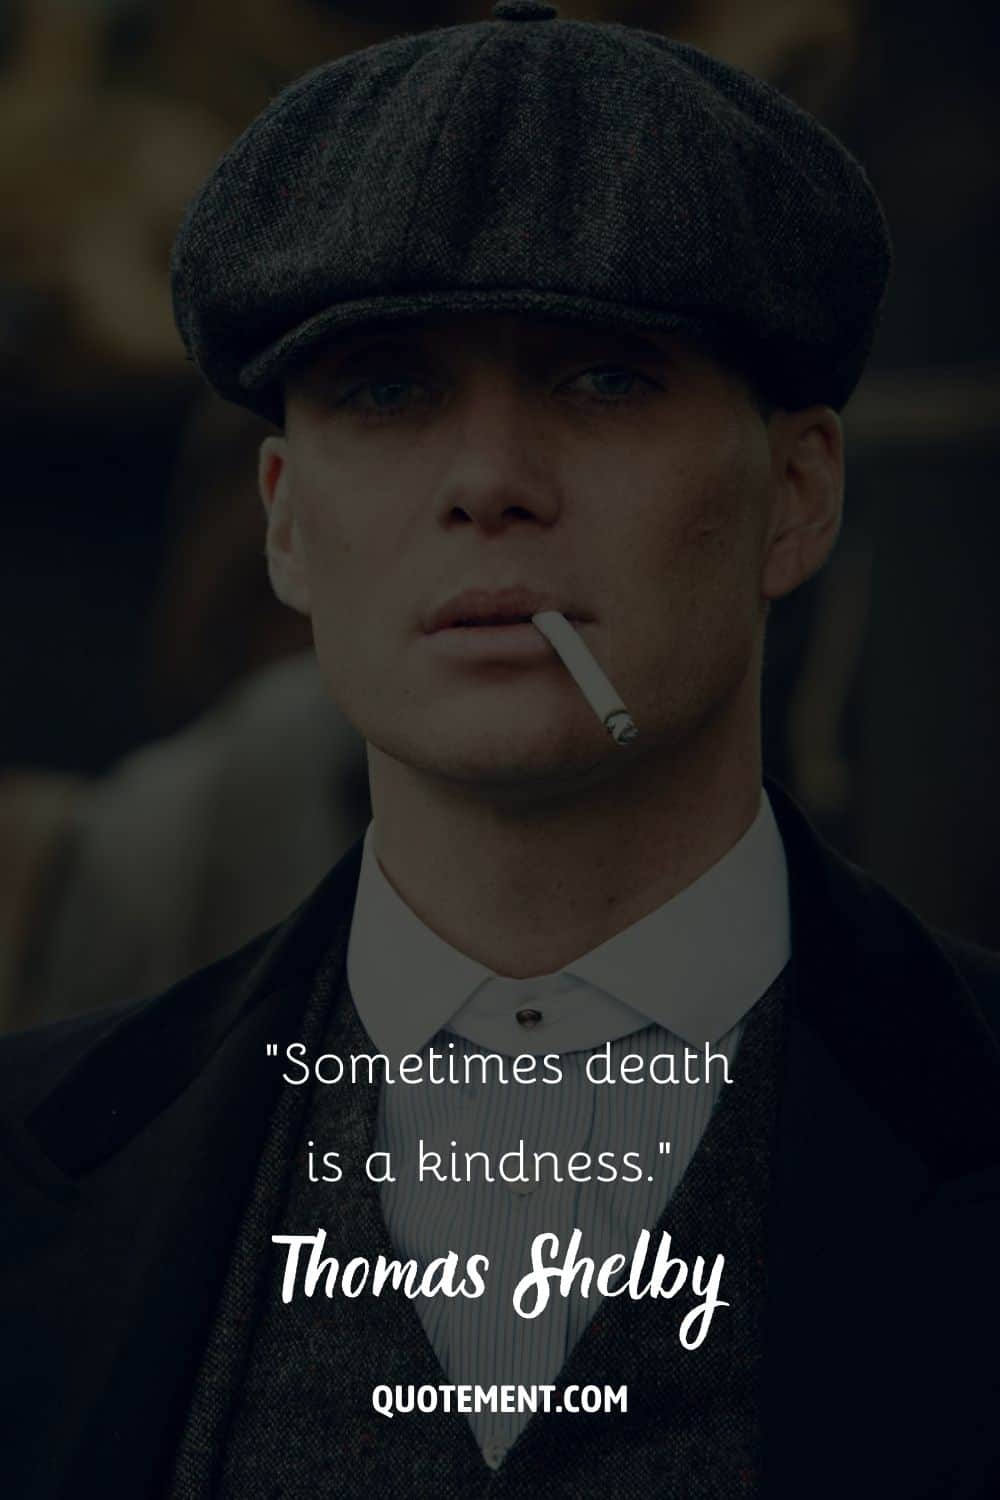 Peaky Blinder attire with cigarette in hand representing tommy shelby quote about life
